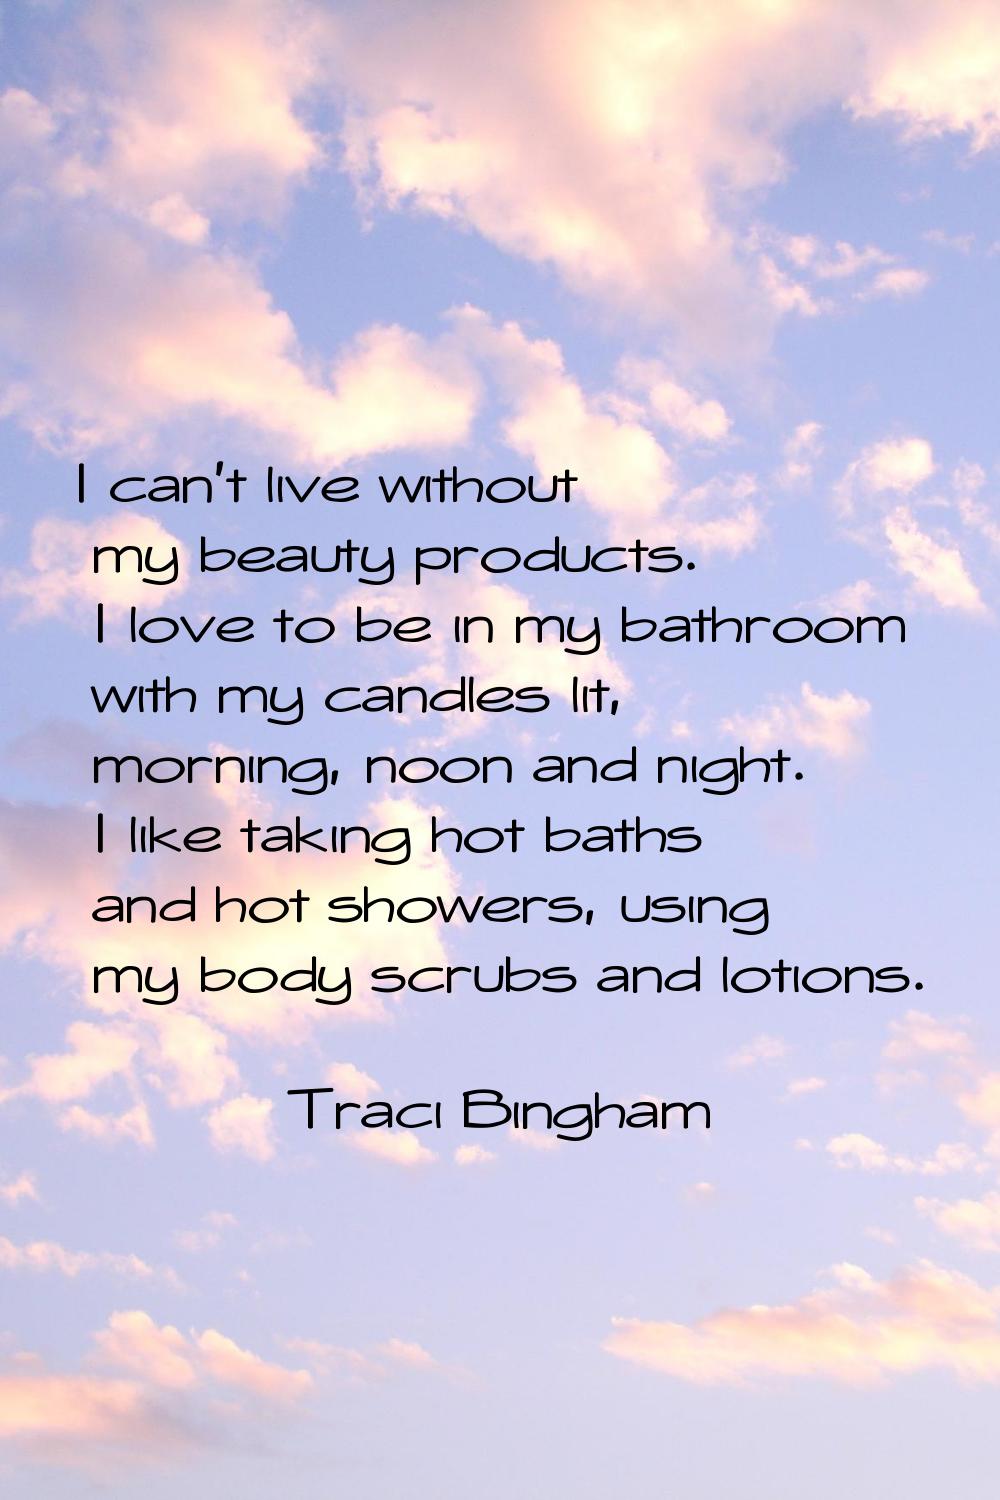 I can't live without my beauty products. I love to be in my bathroom with my candles lit, morning, 